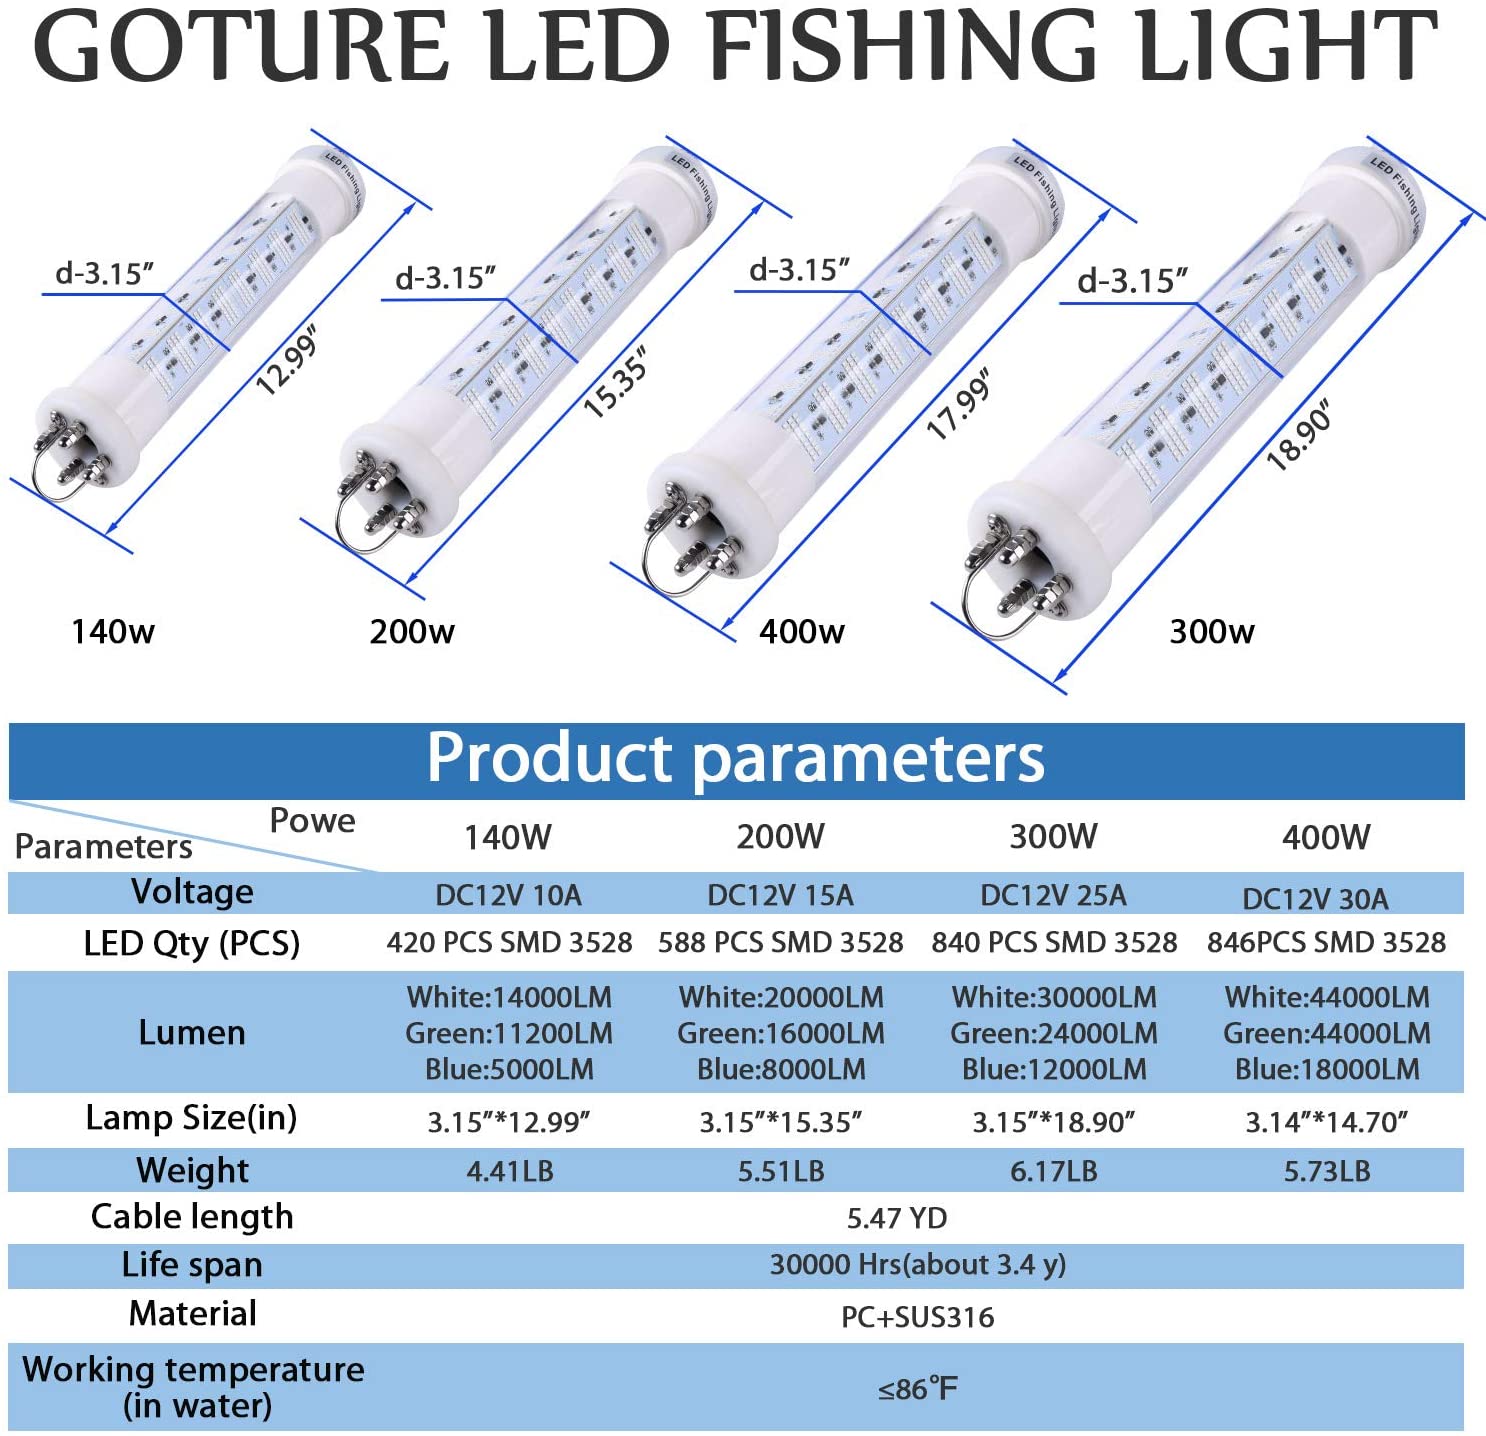  Goture 12V IP68 High-Power LED Fully Submersible Night Fishing  Light Deep Drop Underwater Lure Bait Fish Finder Lamp with 5.53 Cable for  Krill, Phytoplankton, Squid - Blue : Sports & Outdoors